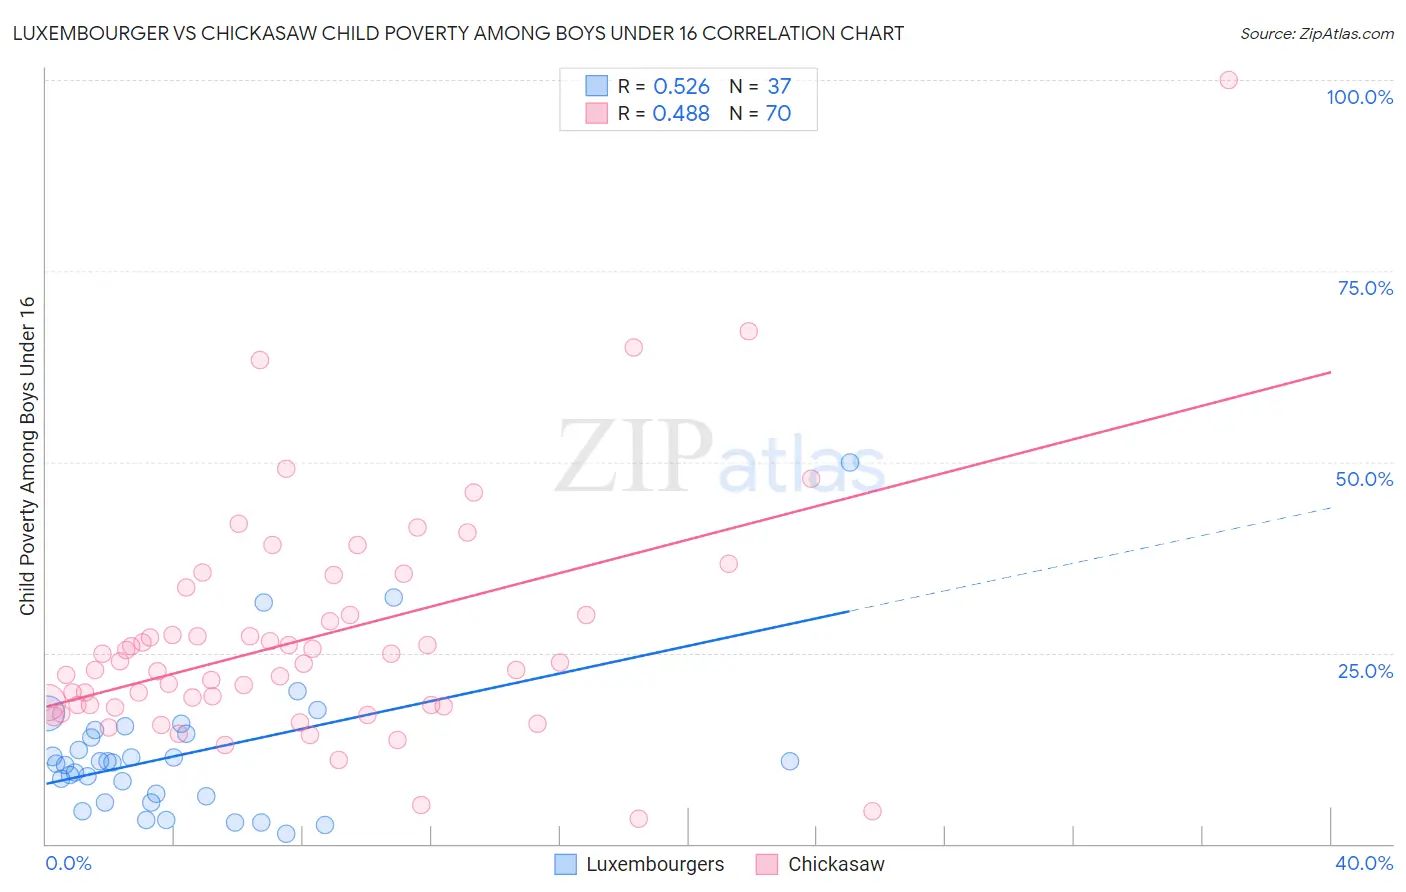 Luxembourger vs Chickasaw Child Poverty Among Boys Under 16